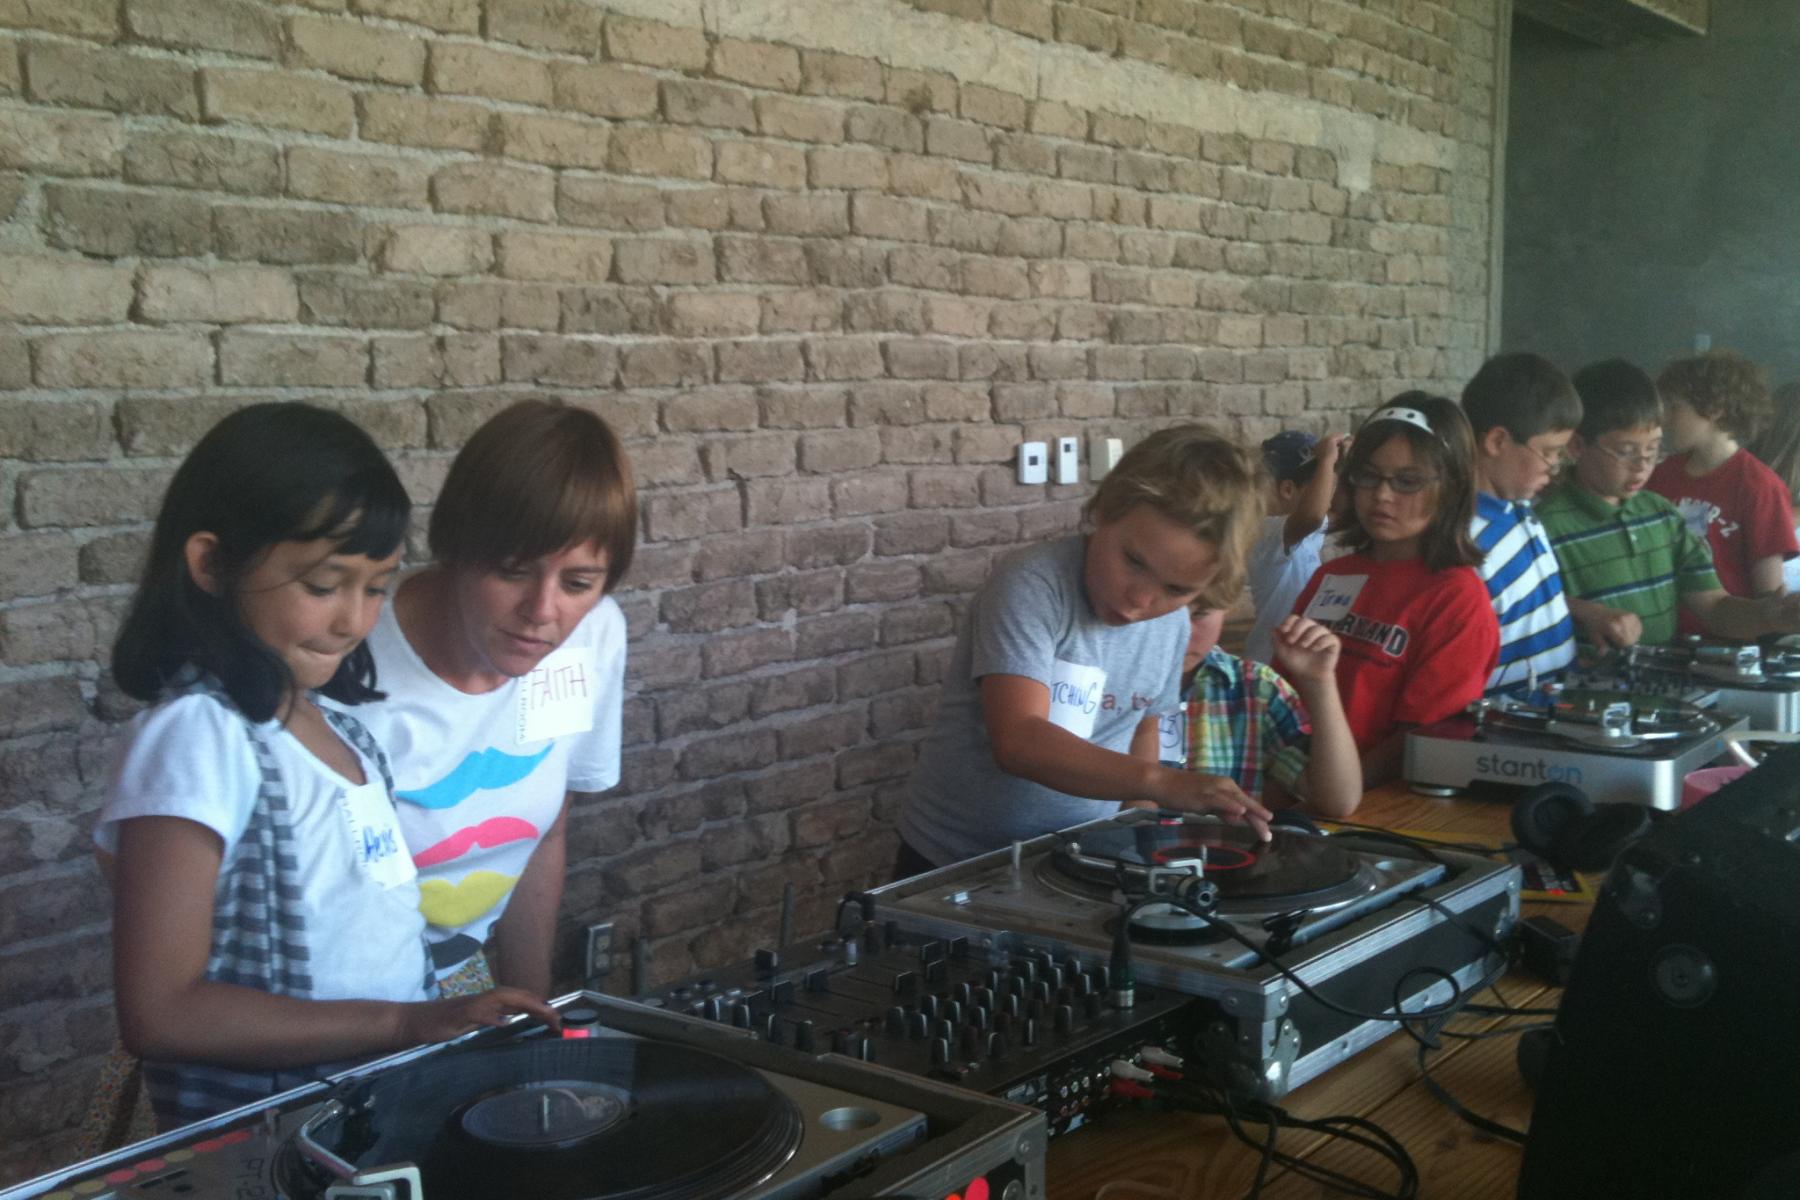 Instructor Faith Gay and students at 2011 DJ Camp. Photo by JD DiFabbio.